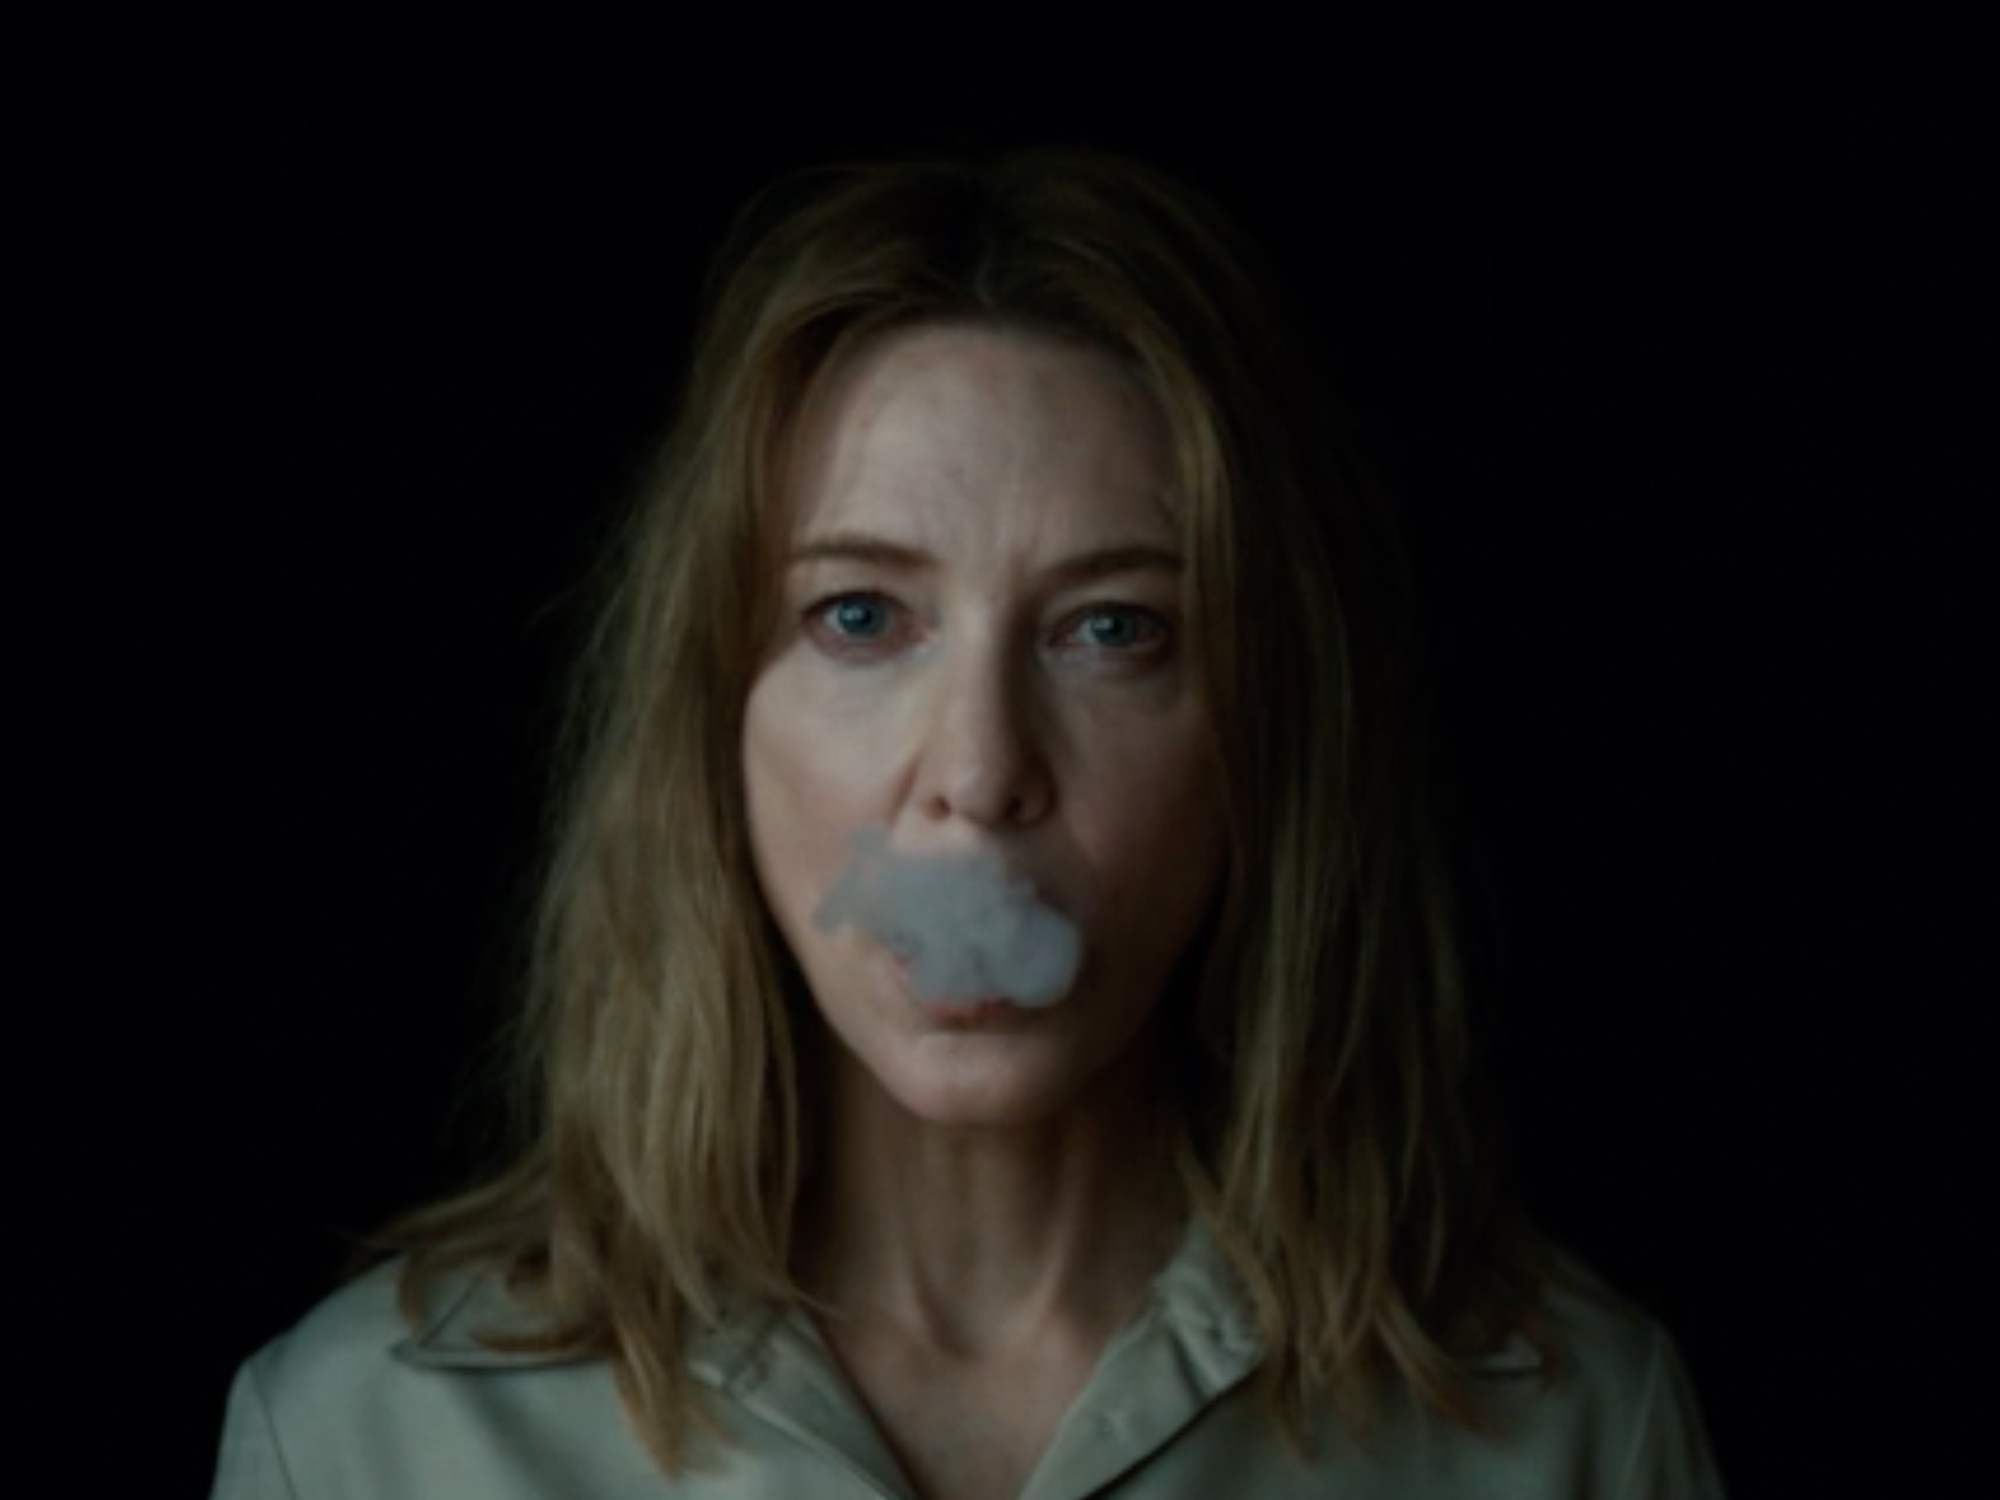 Cate Blanchett is smoking in our first look at Todd